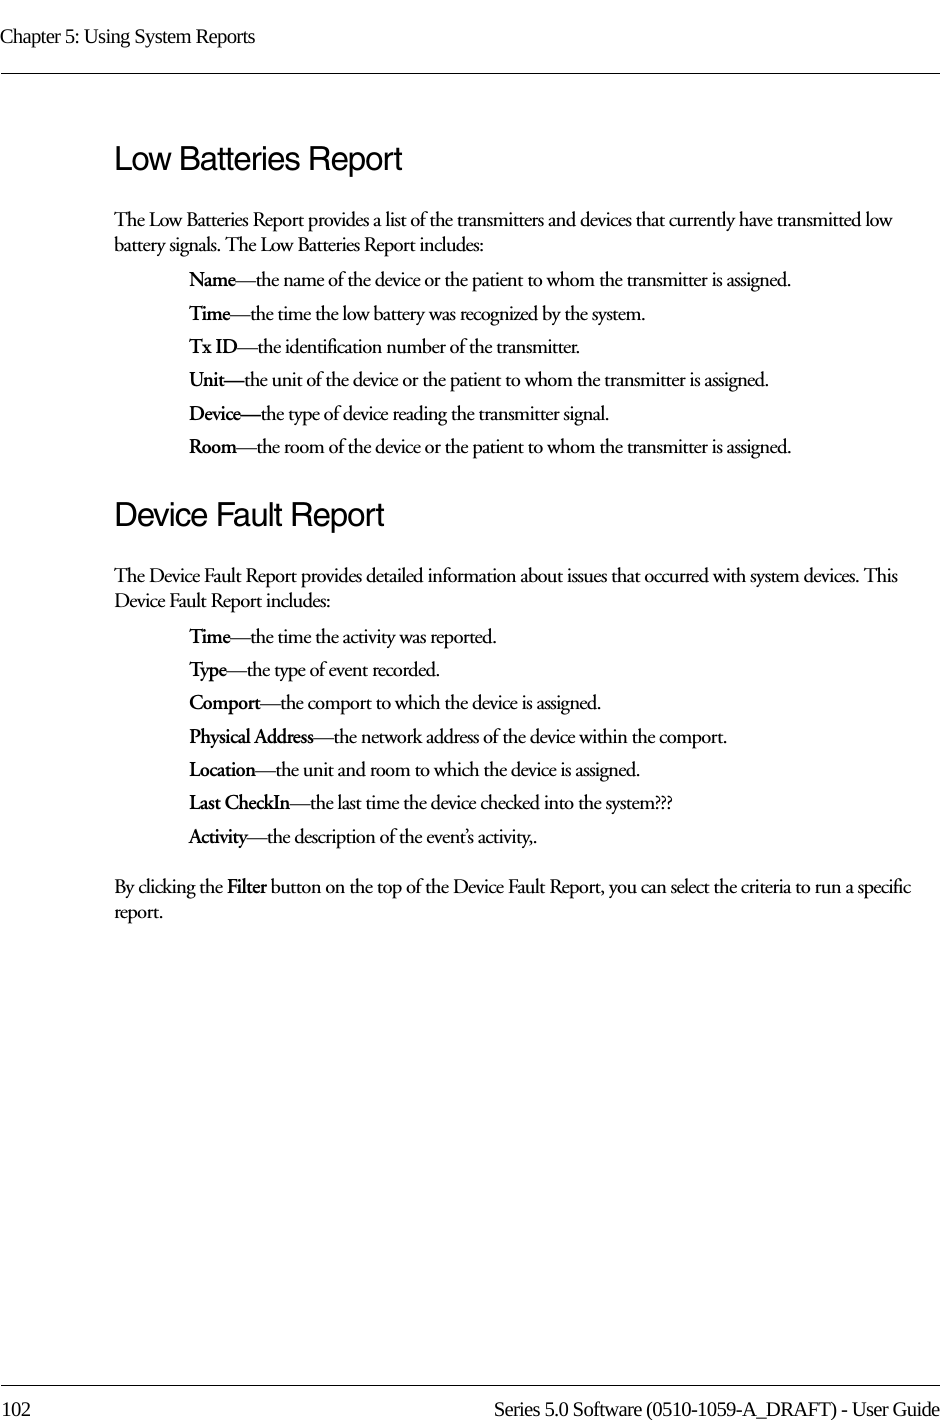 Chapter 5: Using System Reports102 Series 5.0 Software (0510-1059-A_DRAFT) - User GuideLow Batteries ReportThe Low Batteries Report provides a list of the transmitters and devices that currently have transmitted low battery signals. The Low Batteries Report includes:Name—the name of the device or the patient to whom the transmitter is assigned. Time—the time the low battery was recognized by the system.Tx ID—the identification number of the transmitter.Unit—the unit of the device or the patient to whom the transmitter is assigned.Device—the type of device reading the transmitter signal.Room—the room of the device or the patient to whom the transmitter is assigned.Device Fault ReportThe Device Fault Report provides detailed information about issues that occurred with system devices. This Device Fault Report includes:Time—the time the activity was reported.Typ e—the type of event recorded.Comport—the comport to which the device is assigned.Physical Address—the network address of the device within the comport.Location—the unit and room to which the device is assigned.Last CheckIn—the last time the device checked into the system???Activity—the description of the event’s activity,.By clicking the Filter button on the top of the Device Fault Report, you can select the criteria to run a specific report. 